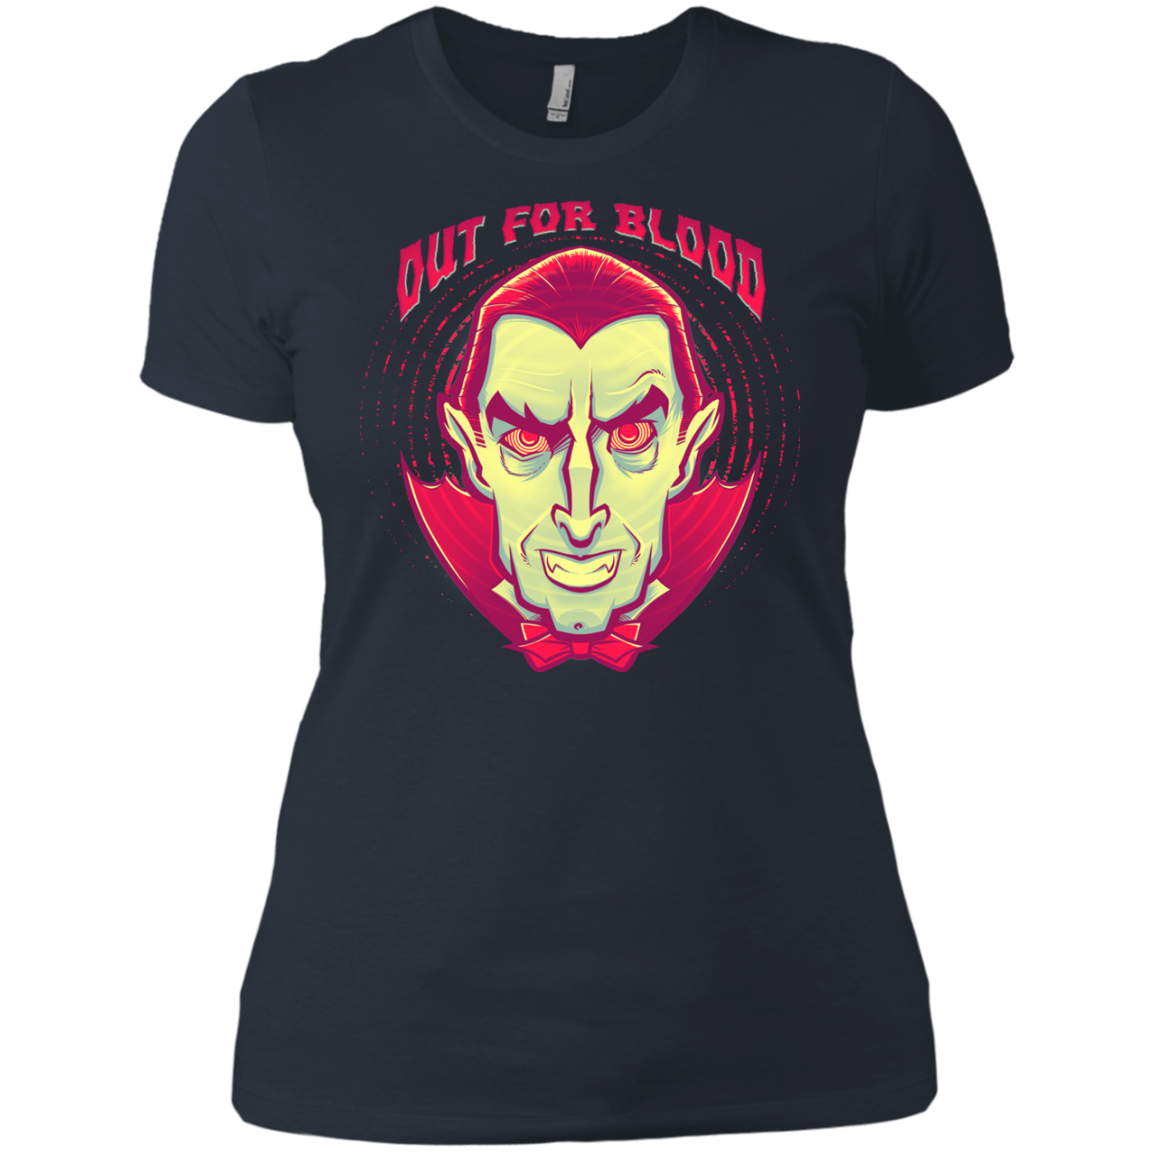 OUT FOR BLOOD Women's Premium T-Shirt